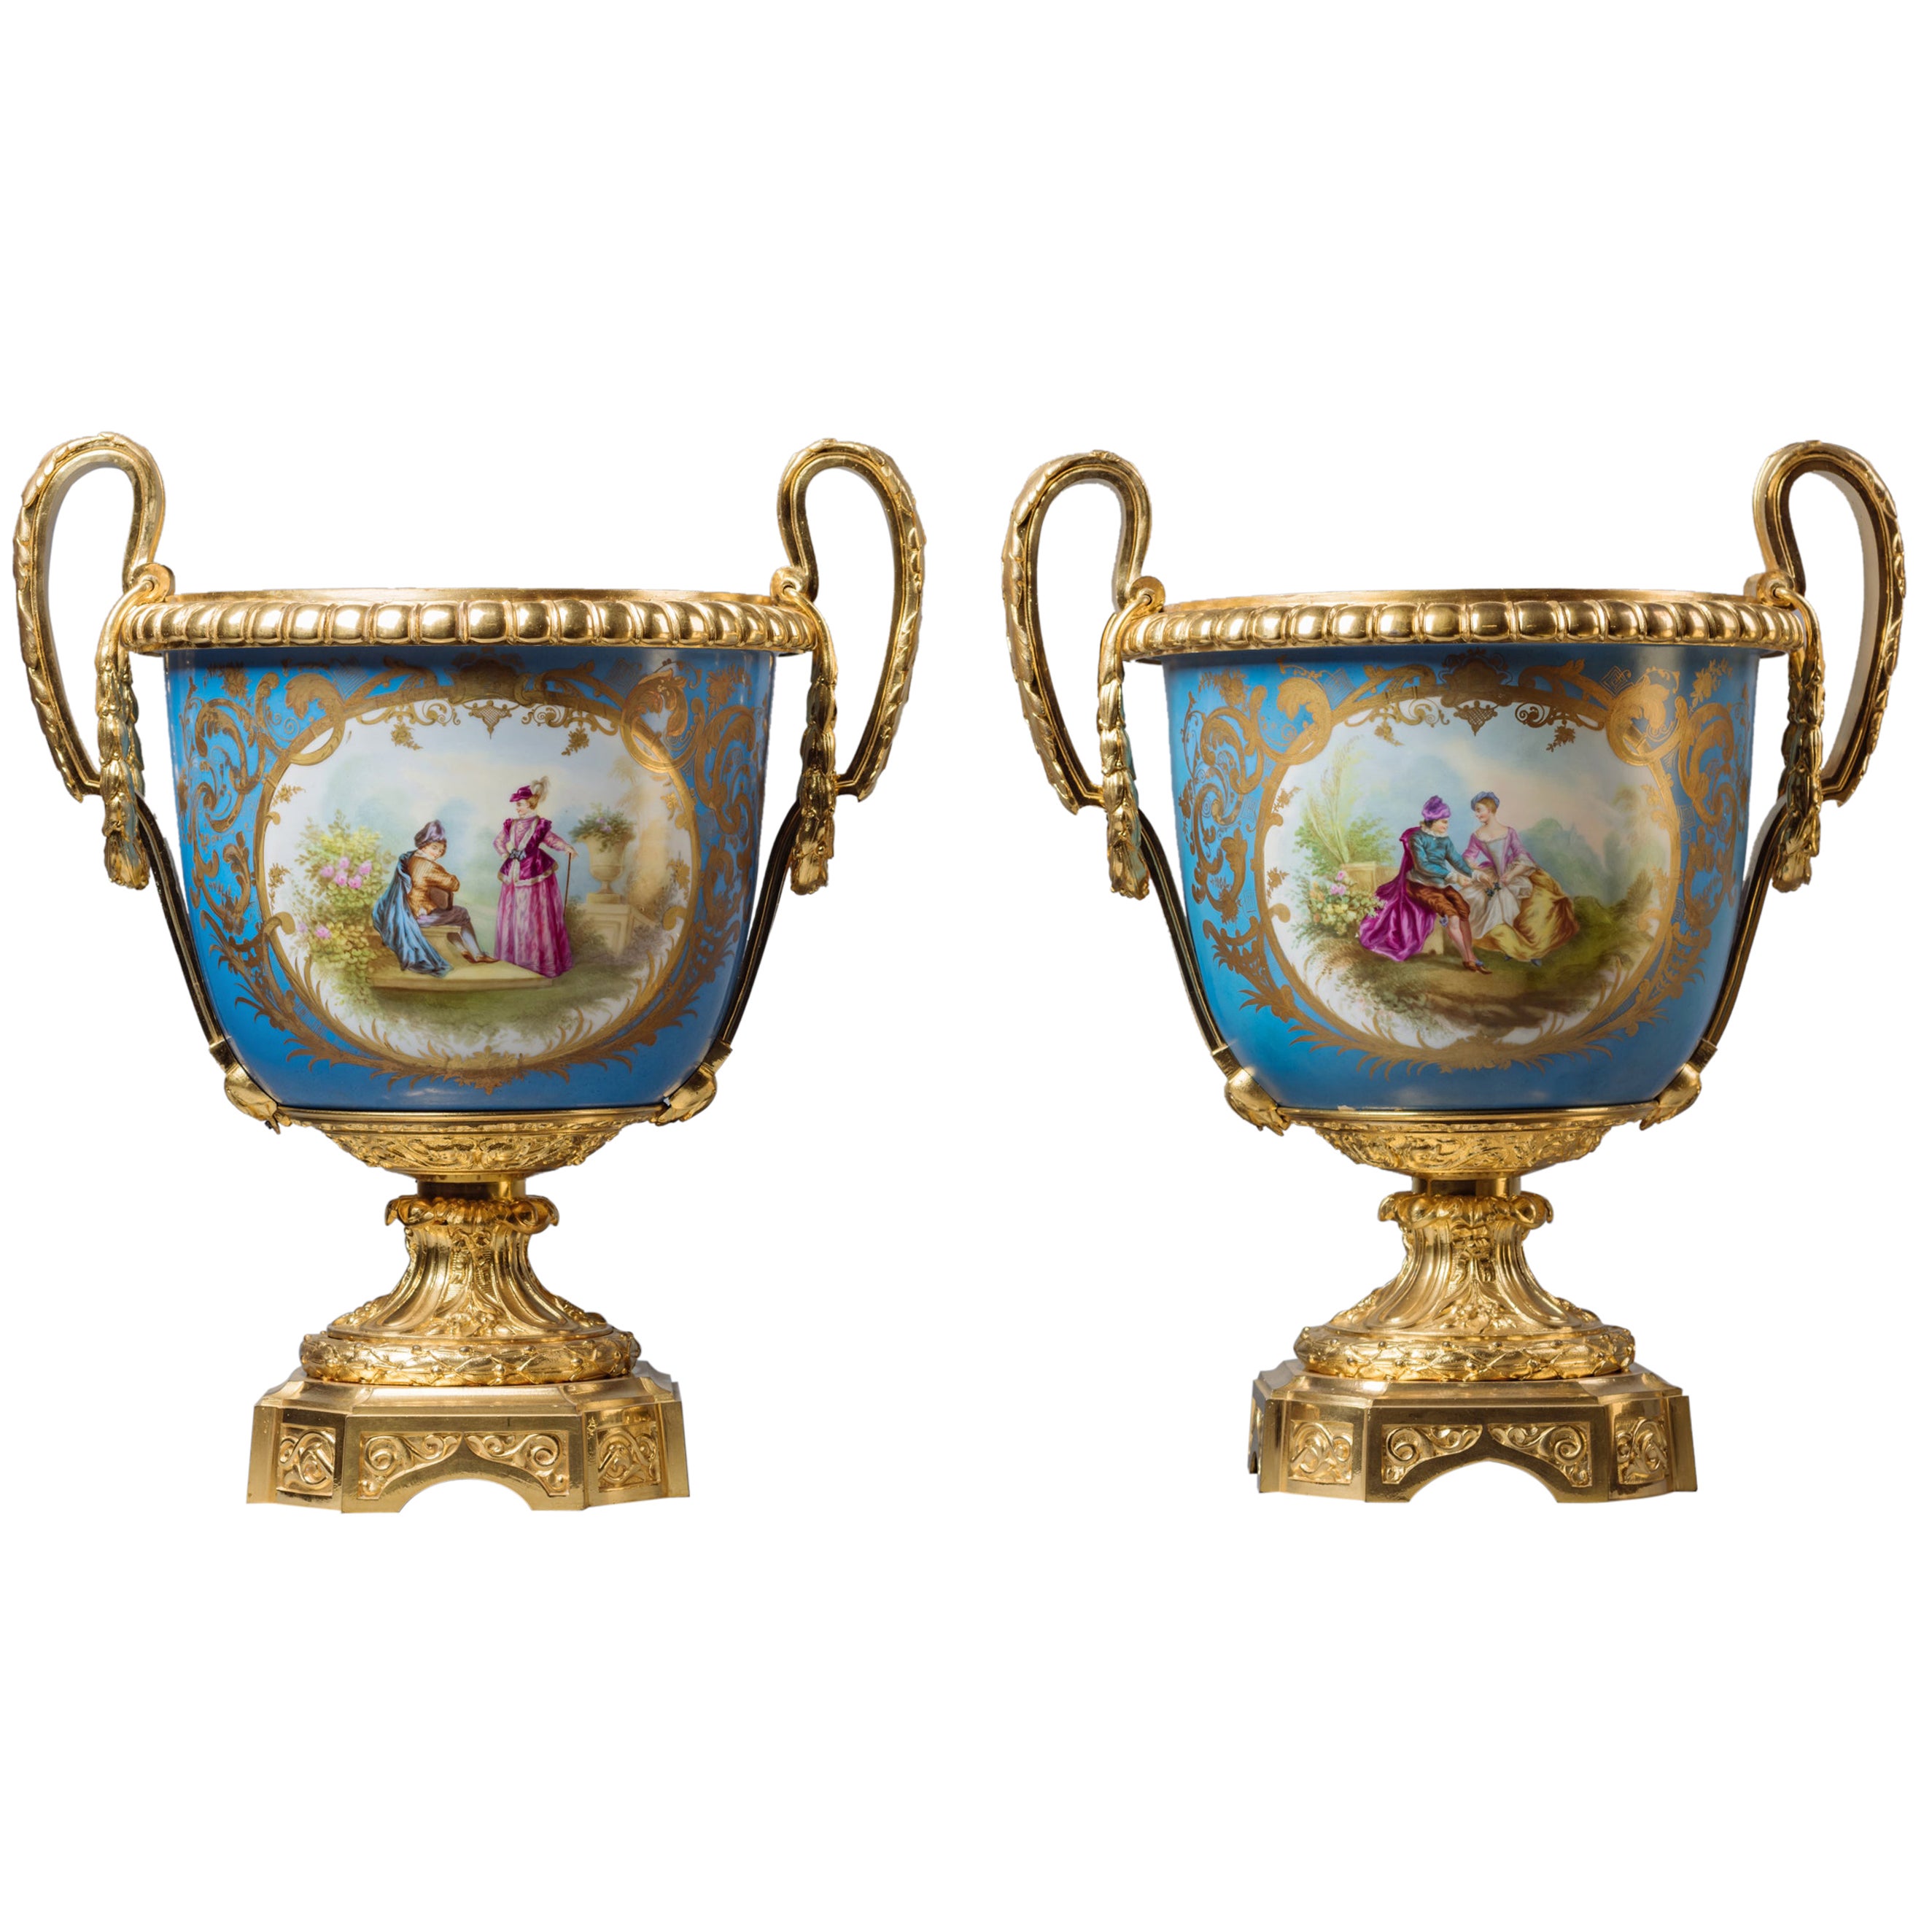 Important and Monumental Pair of Ormolu & Sevres Style 